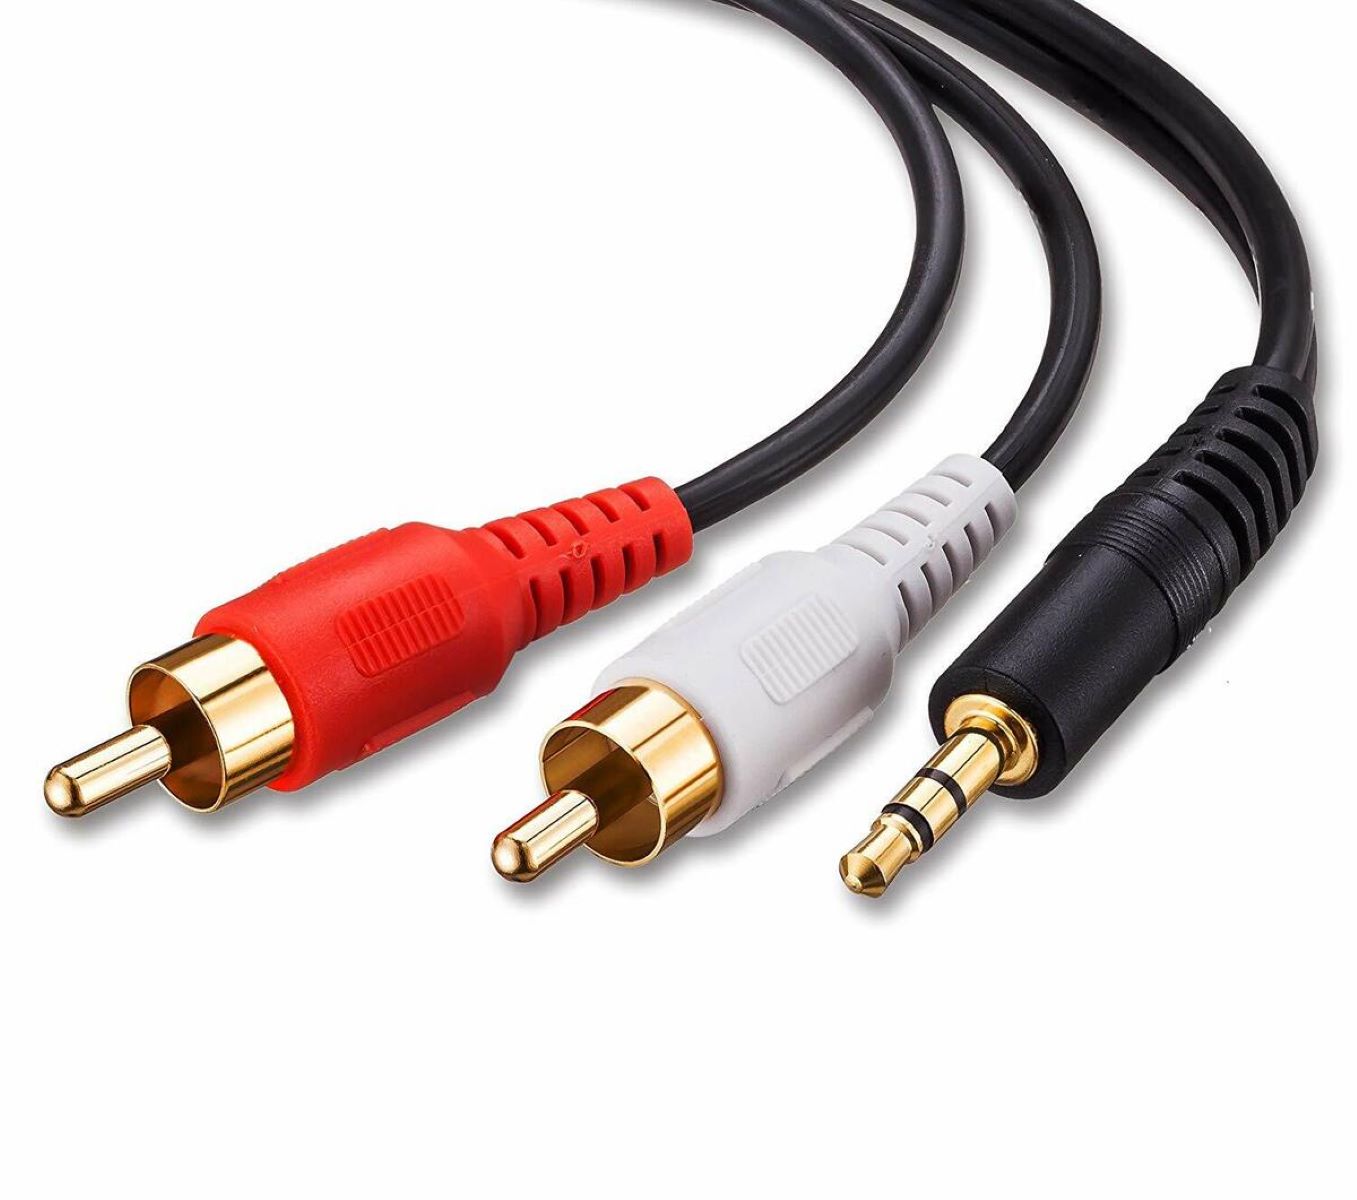 What Is 3.5Mm Male To 2-RCA Male Audio Cable